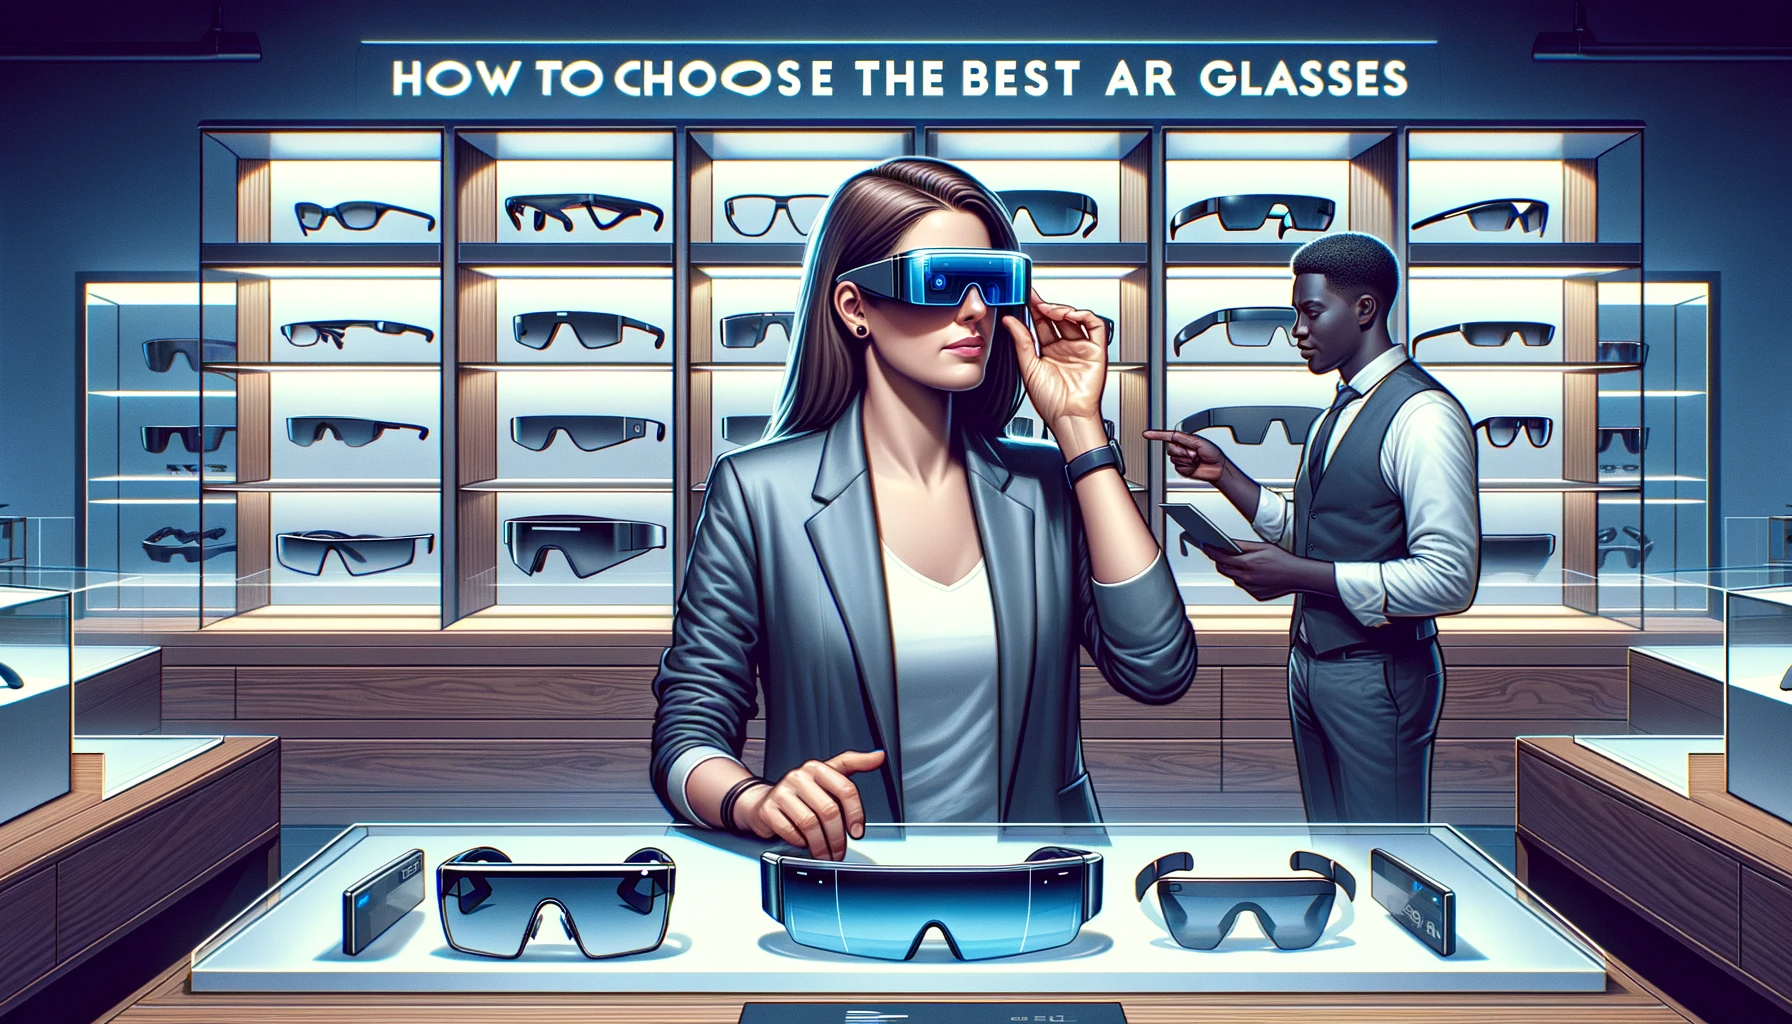 What are the best AR Glasses and how to choose them?